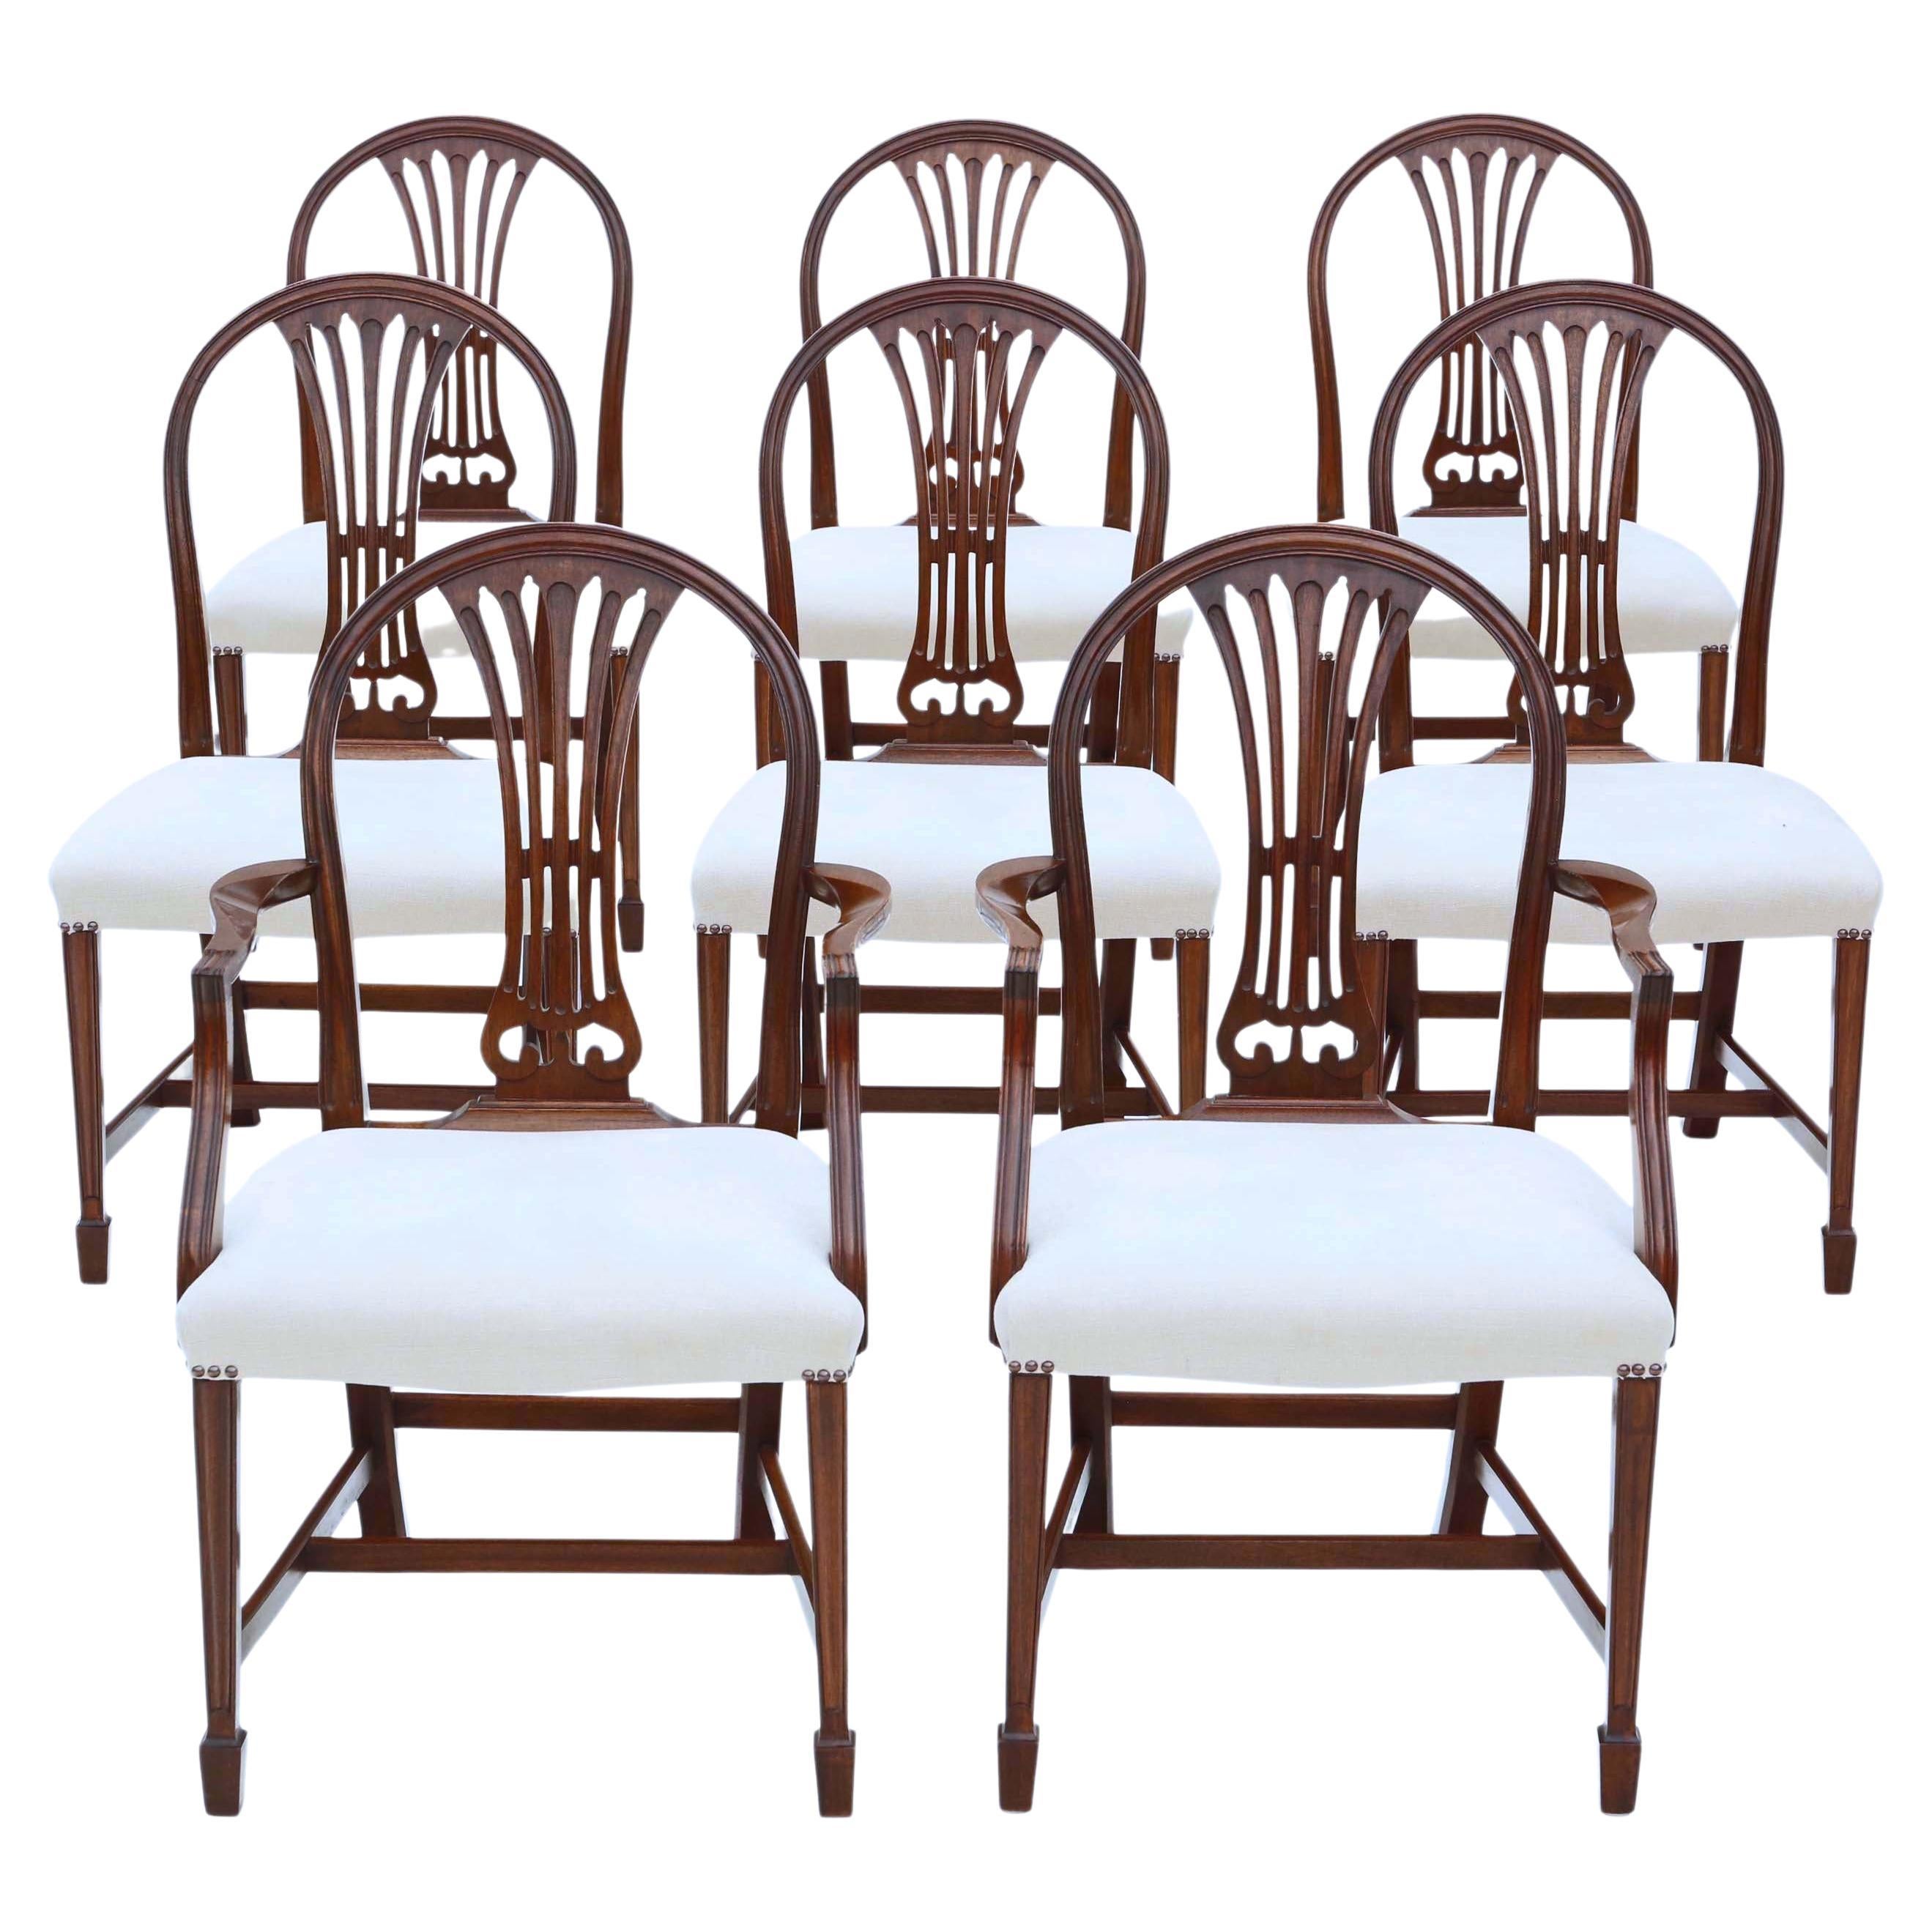 Antique Fine Quality Set of 8 '6 + 2' Georgian Revival Mahogany Dining Chairs